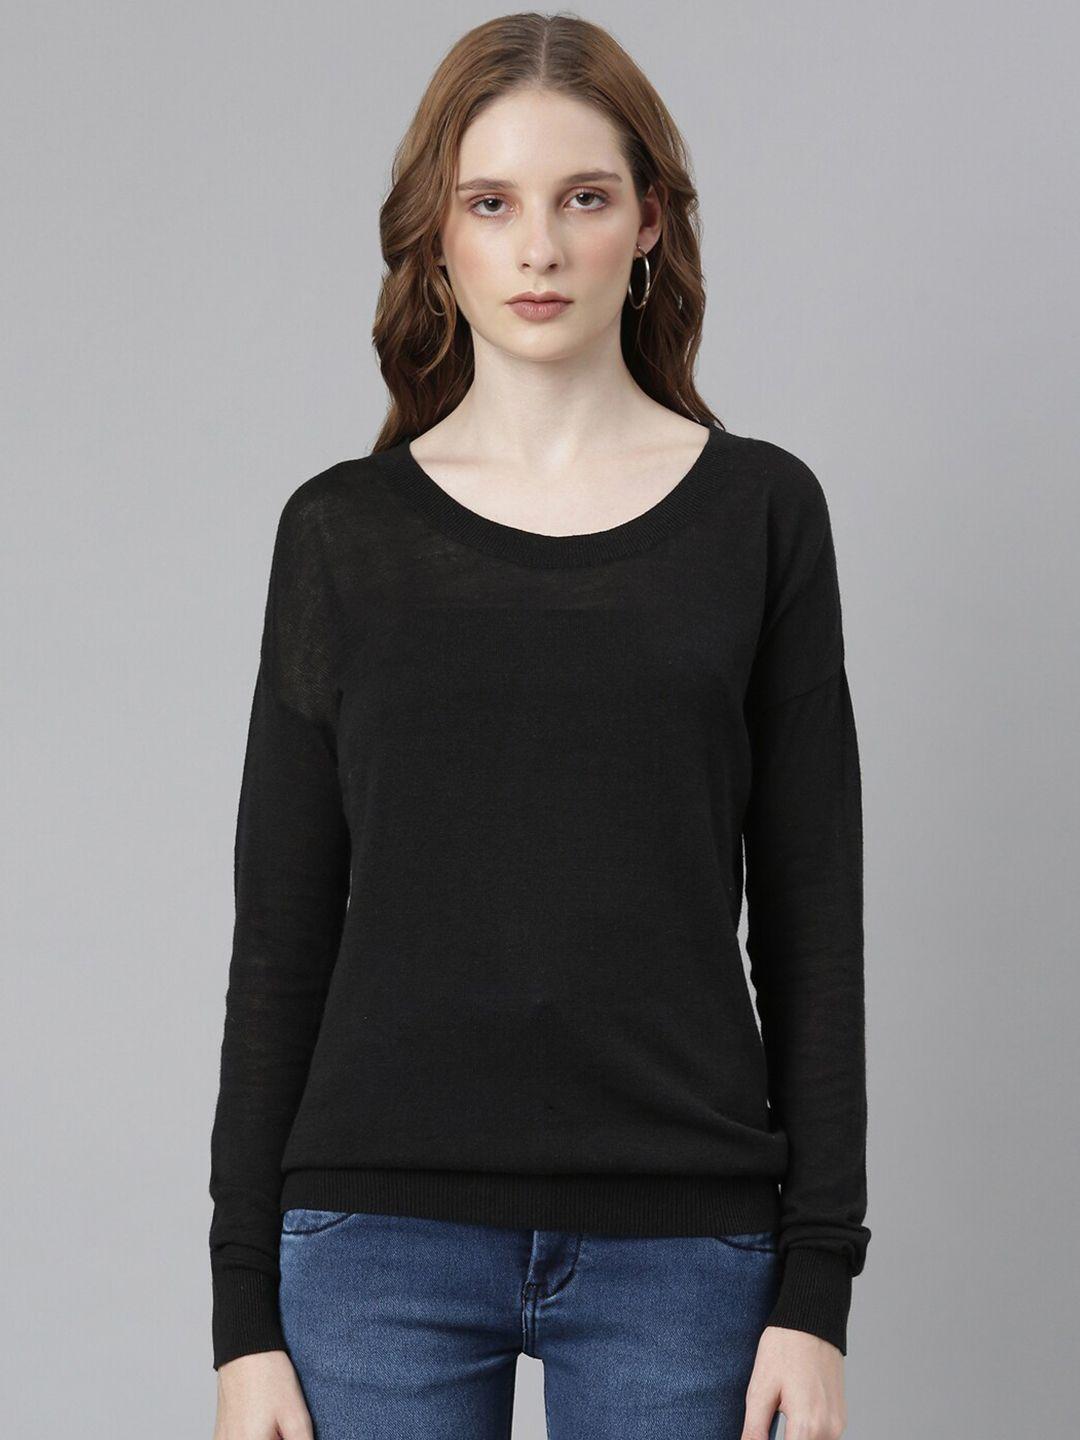 showoff-round-neck-long-sleeves-top